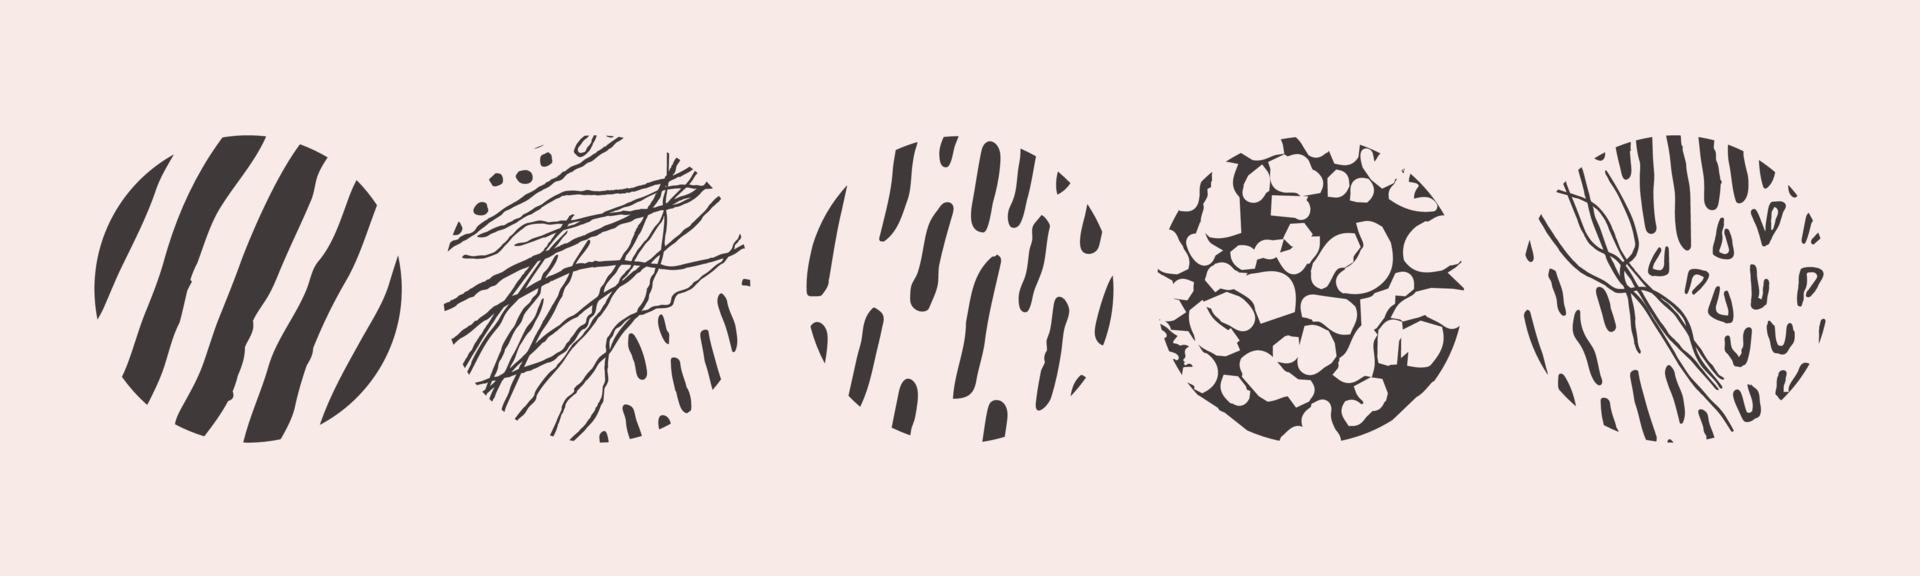 Vector hand drawn set with round isolated abstract black patterns or backgrounds. Various doodle shapes for highlight covers, posters, social media Icons templates.